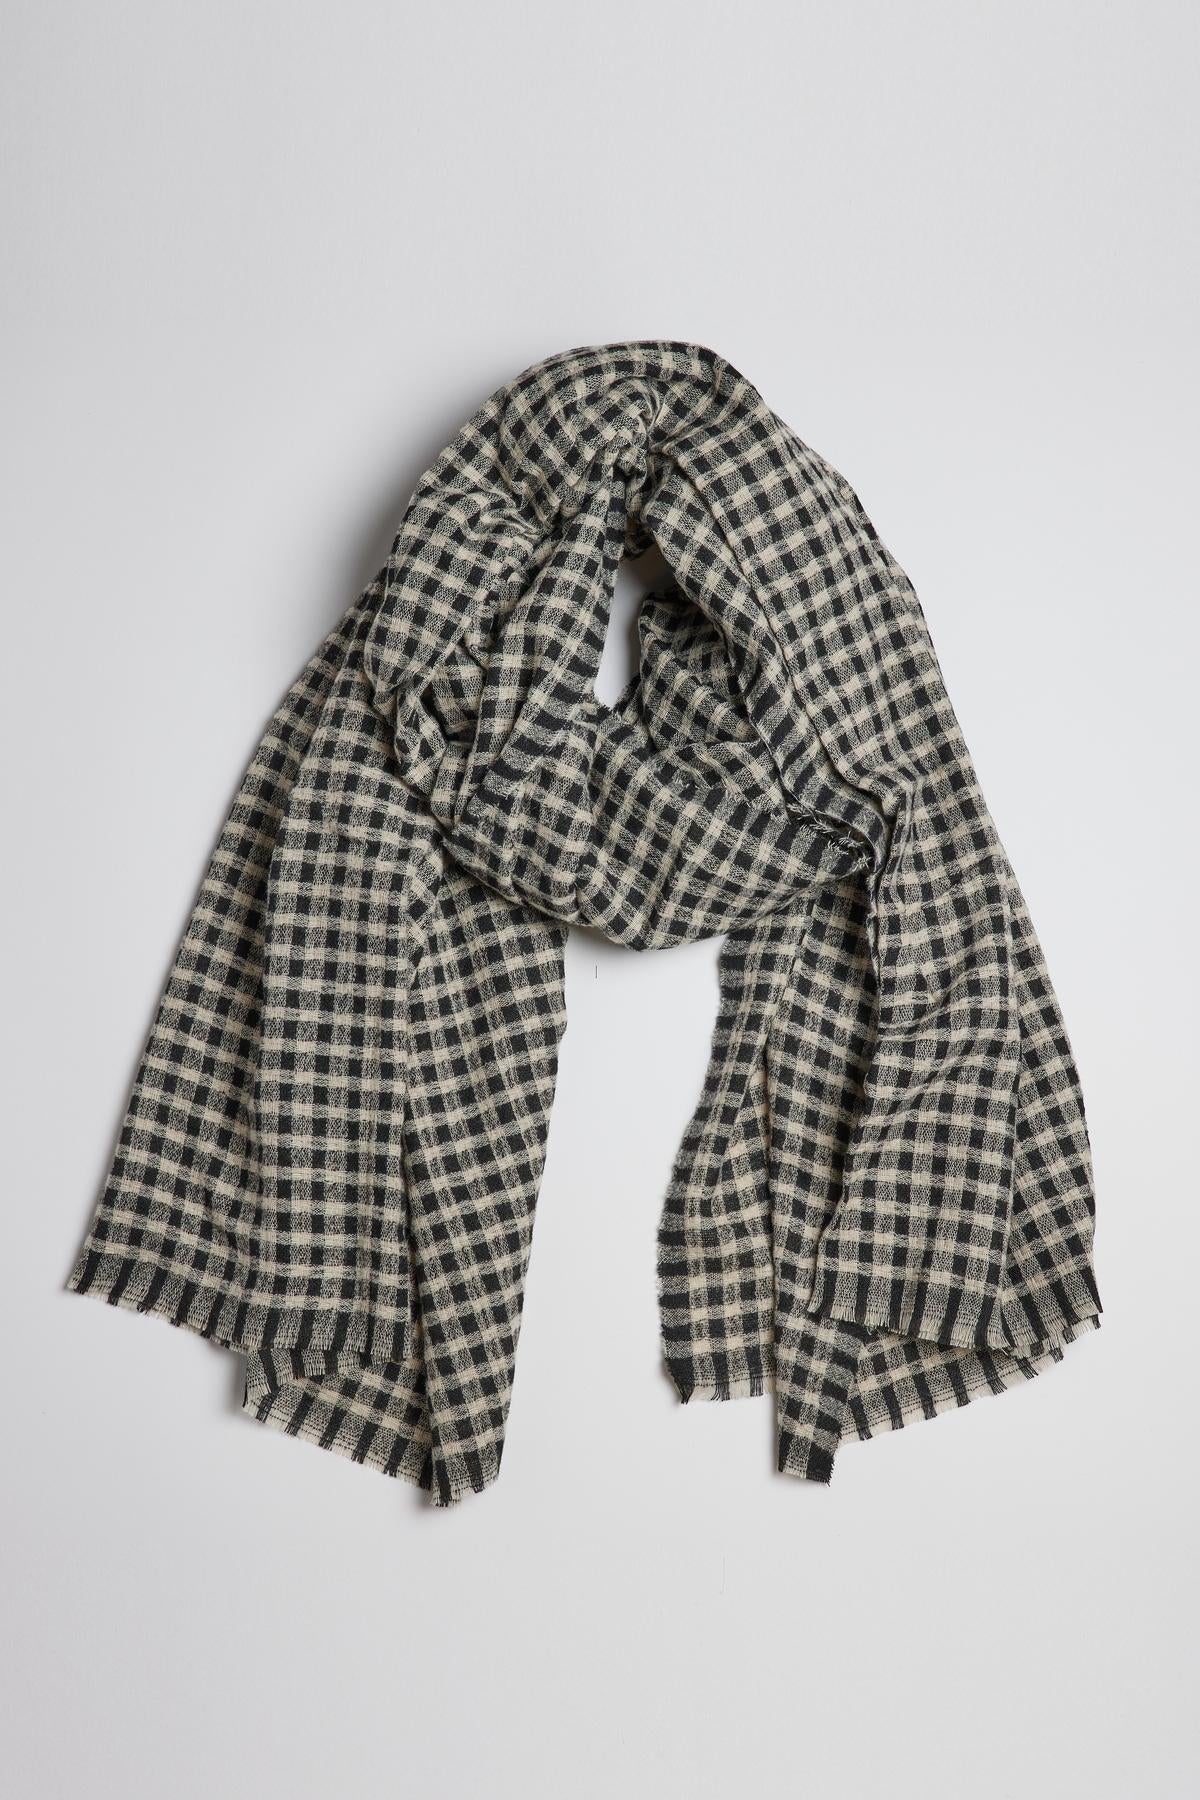   Bicolor Check Scarf in black and ivory 